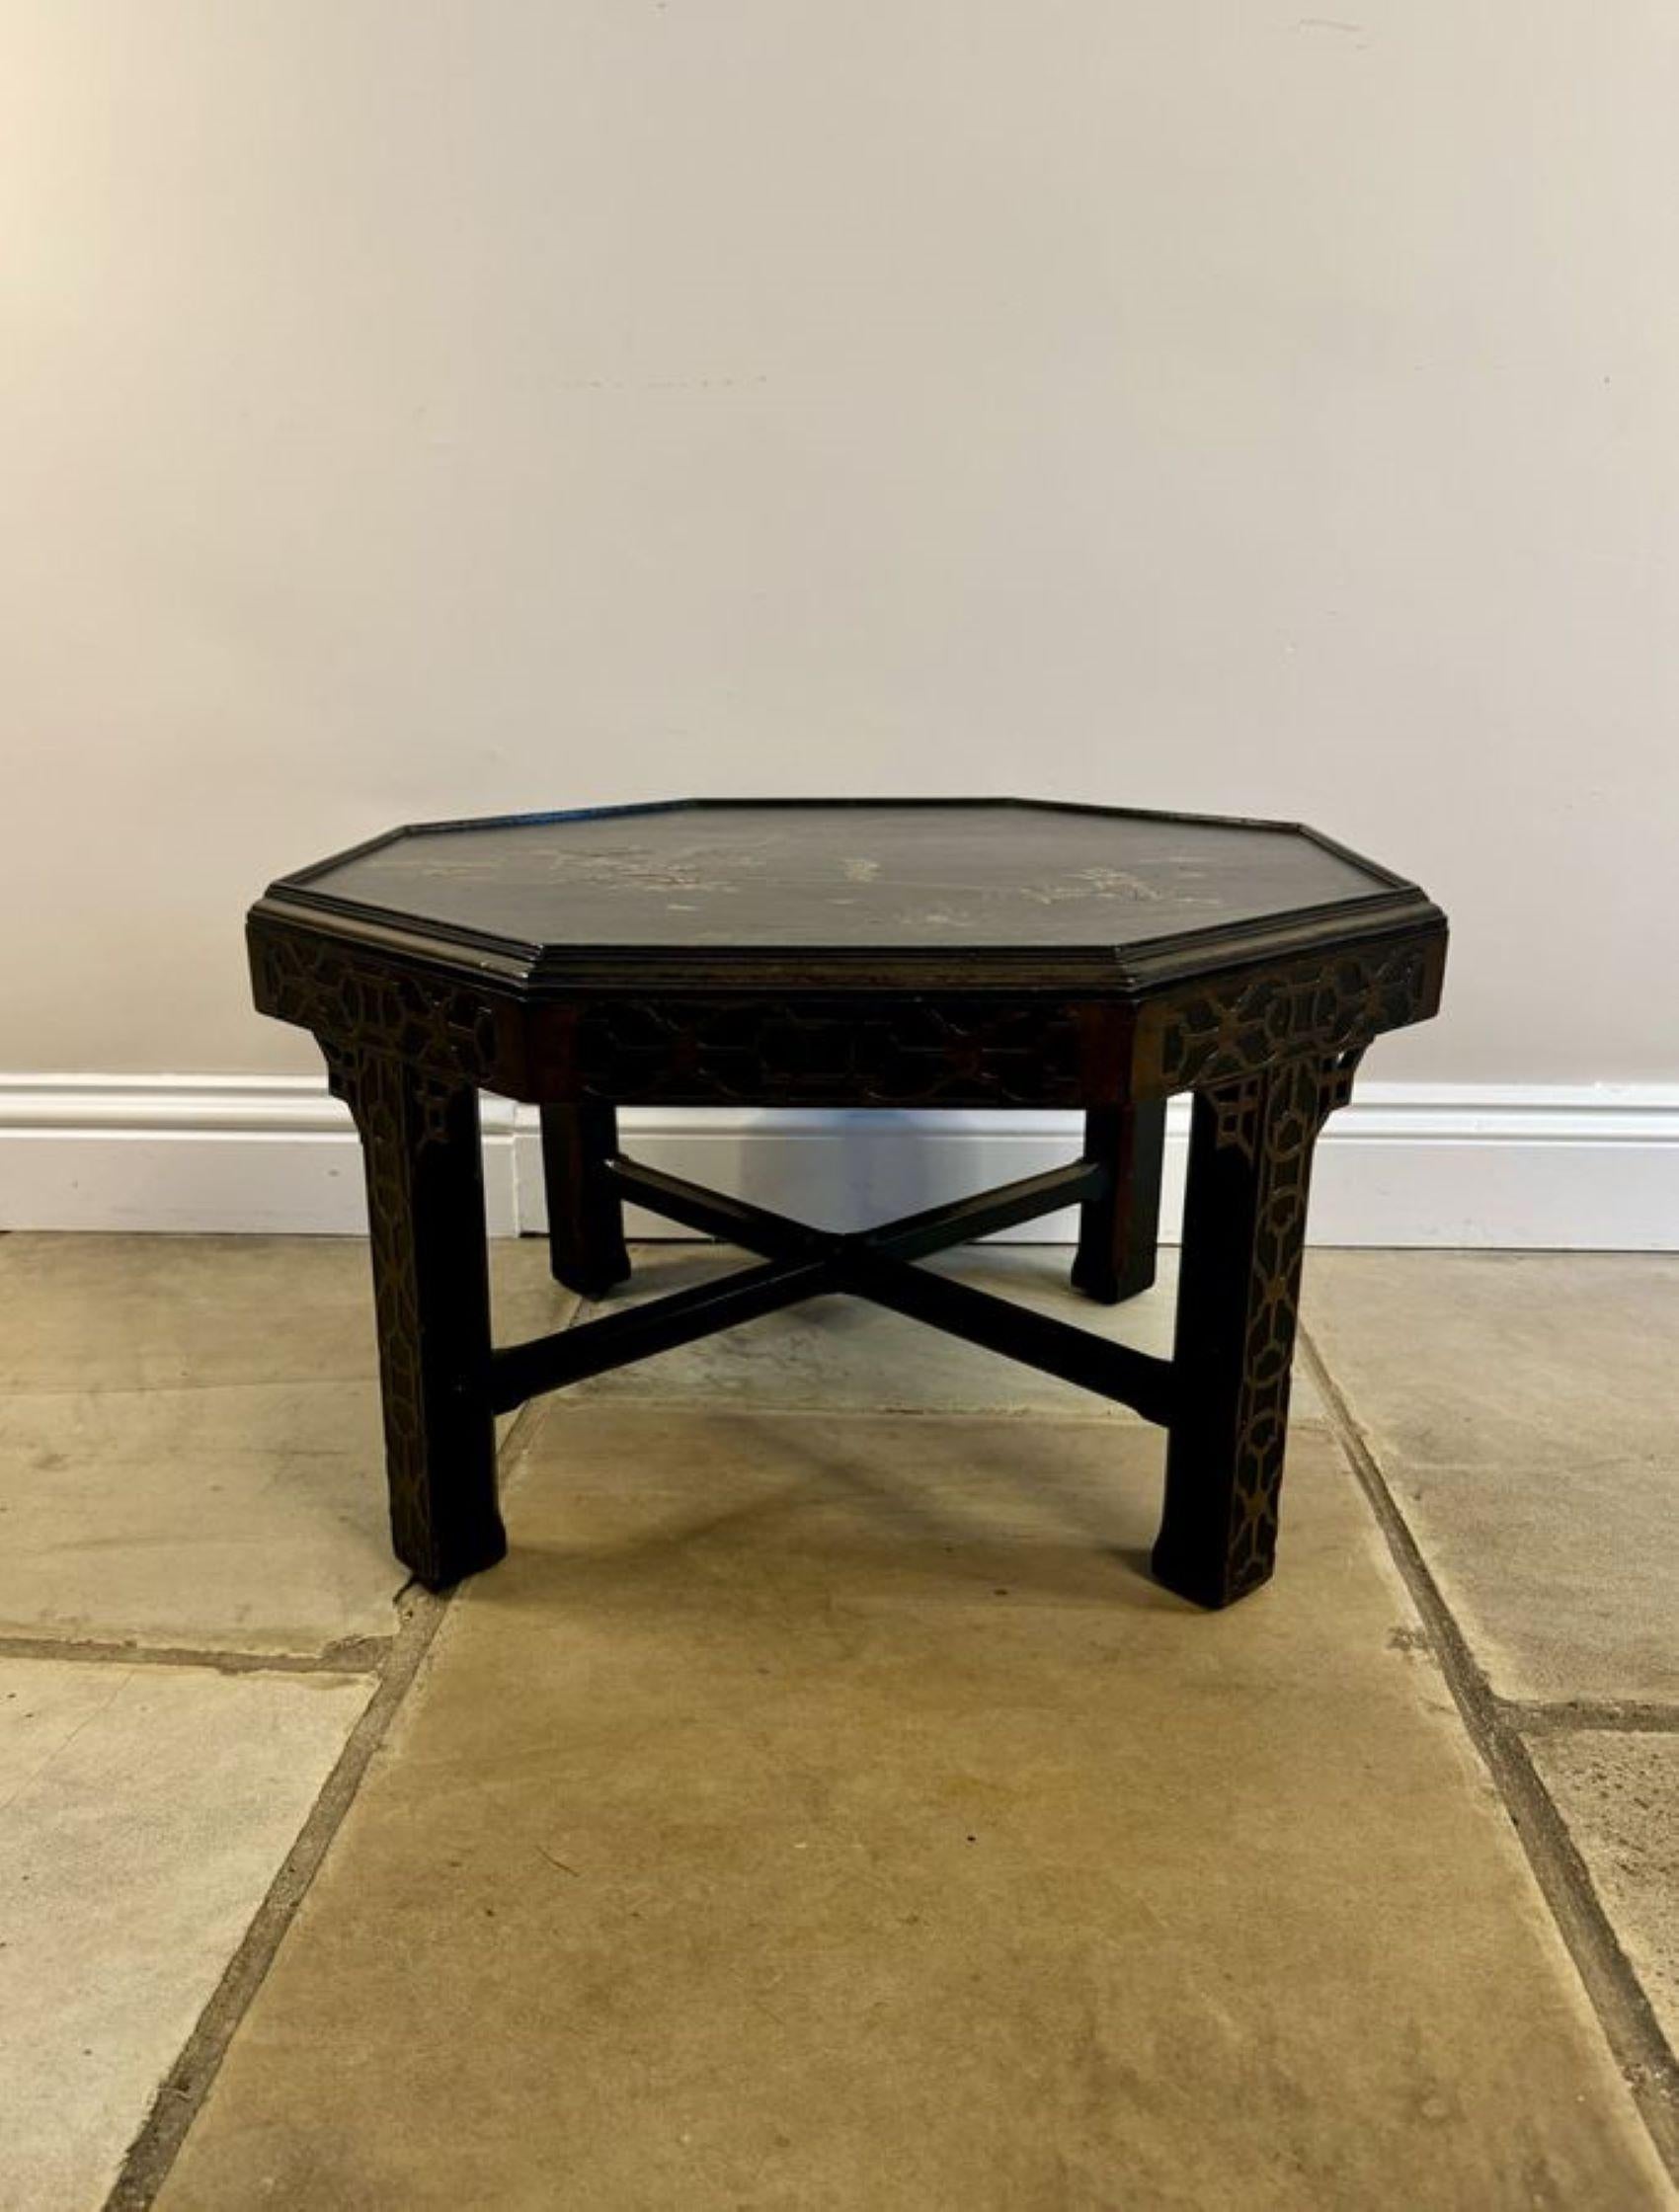 Wonderful quality antique Edwardian chinoiserie decorated coffee table, having a quality antique Edwardian coffee table with fantastic chinoiserie decoration to the top, standing on four square shaped legs united by a cross stretcher.

D. 1900